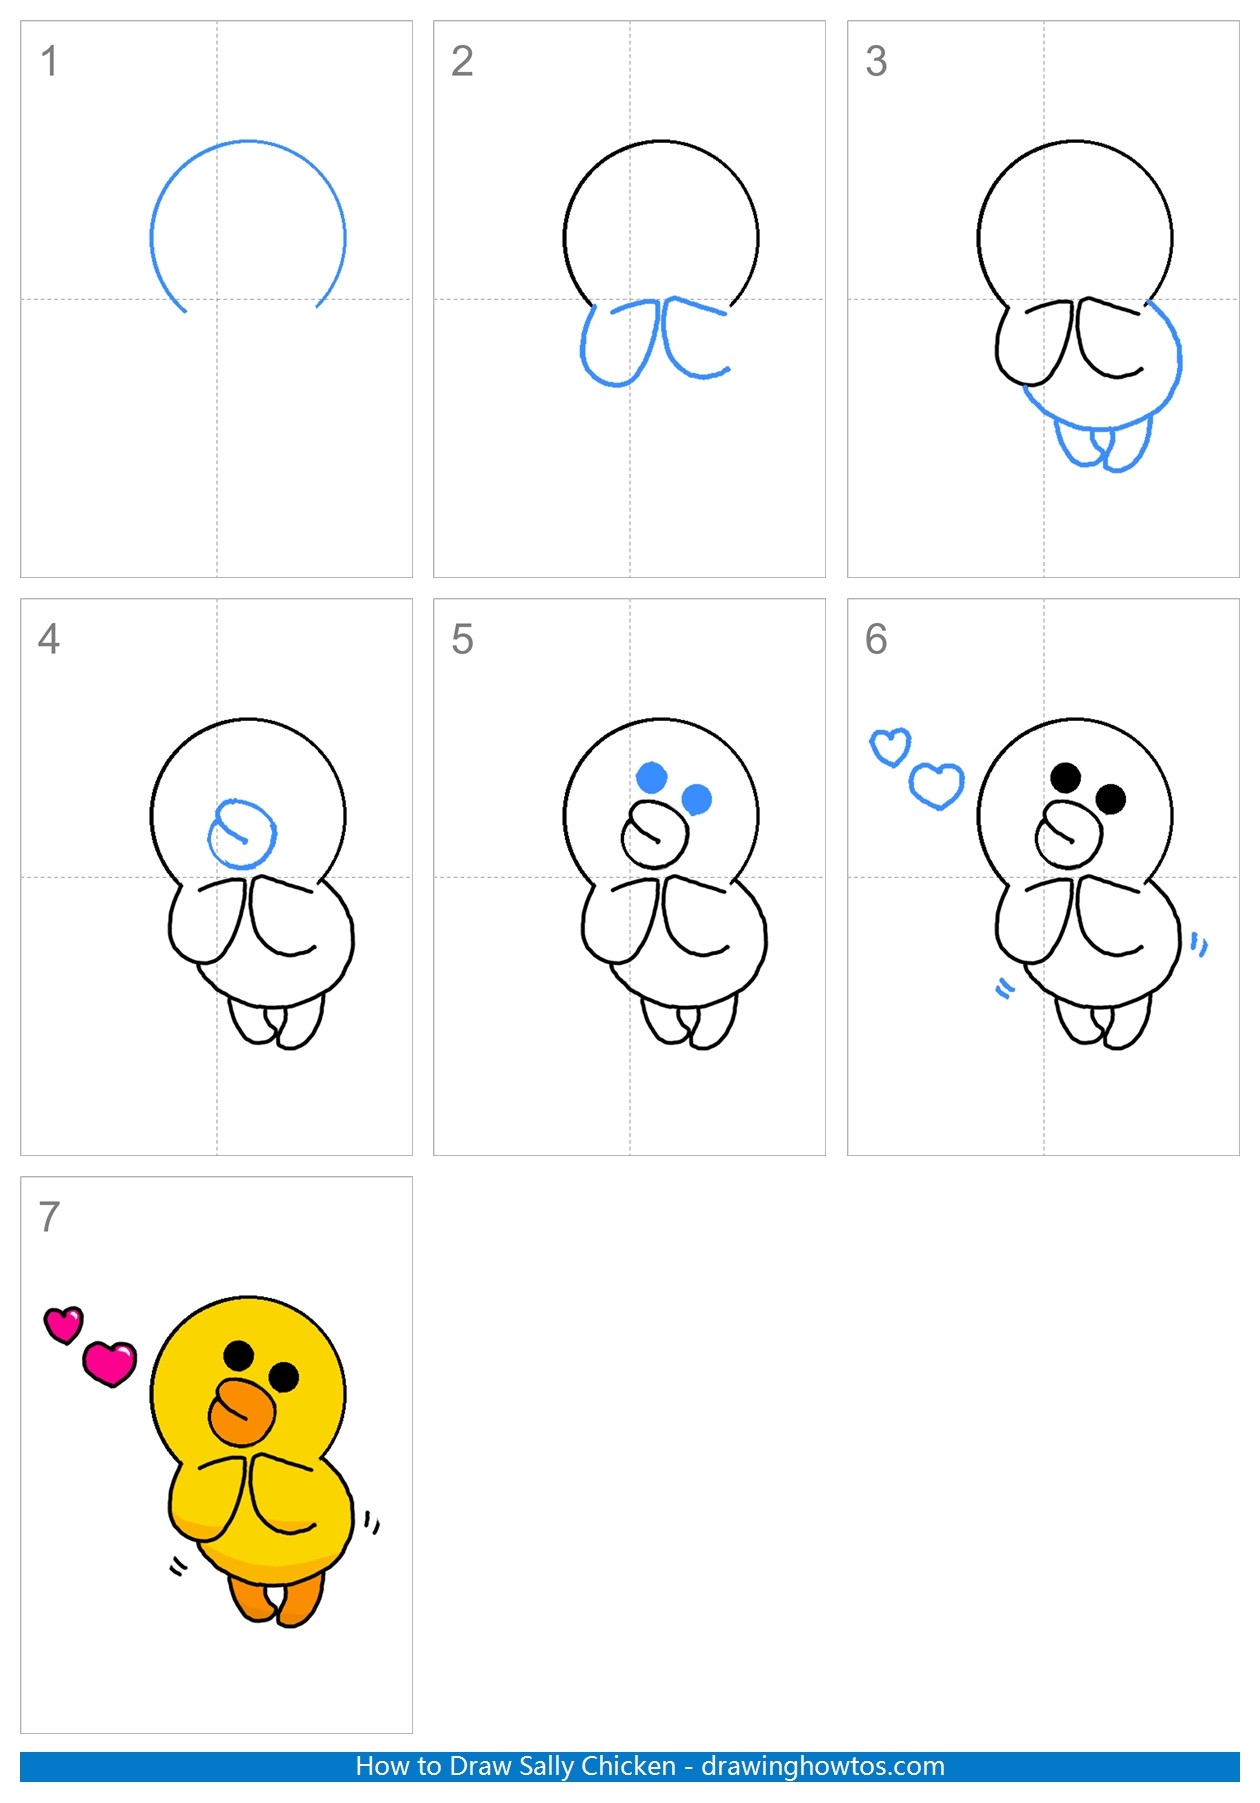 How to Draw Sally Chicken Step by Step